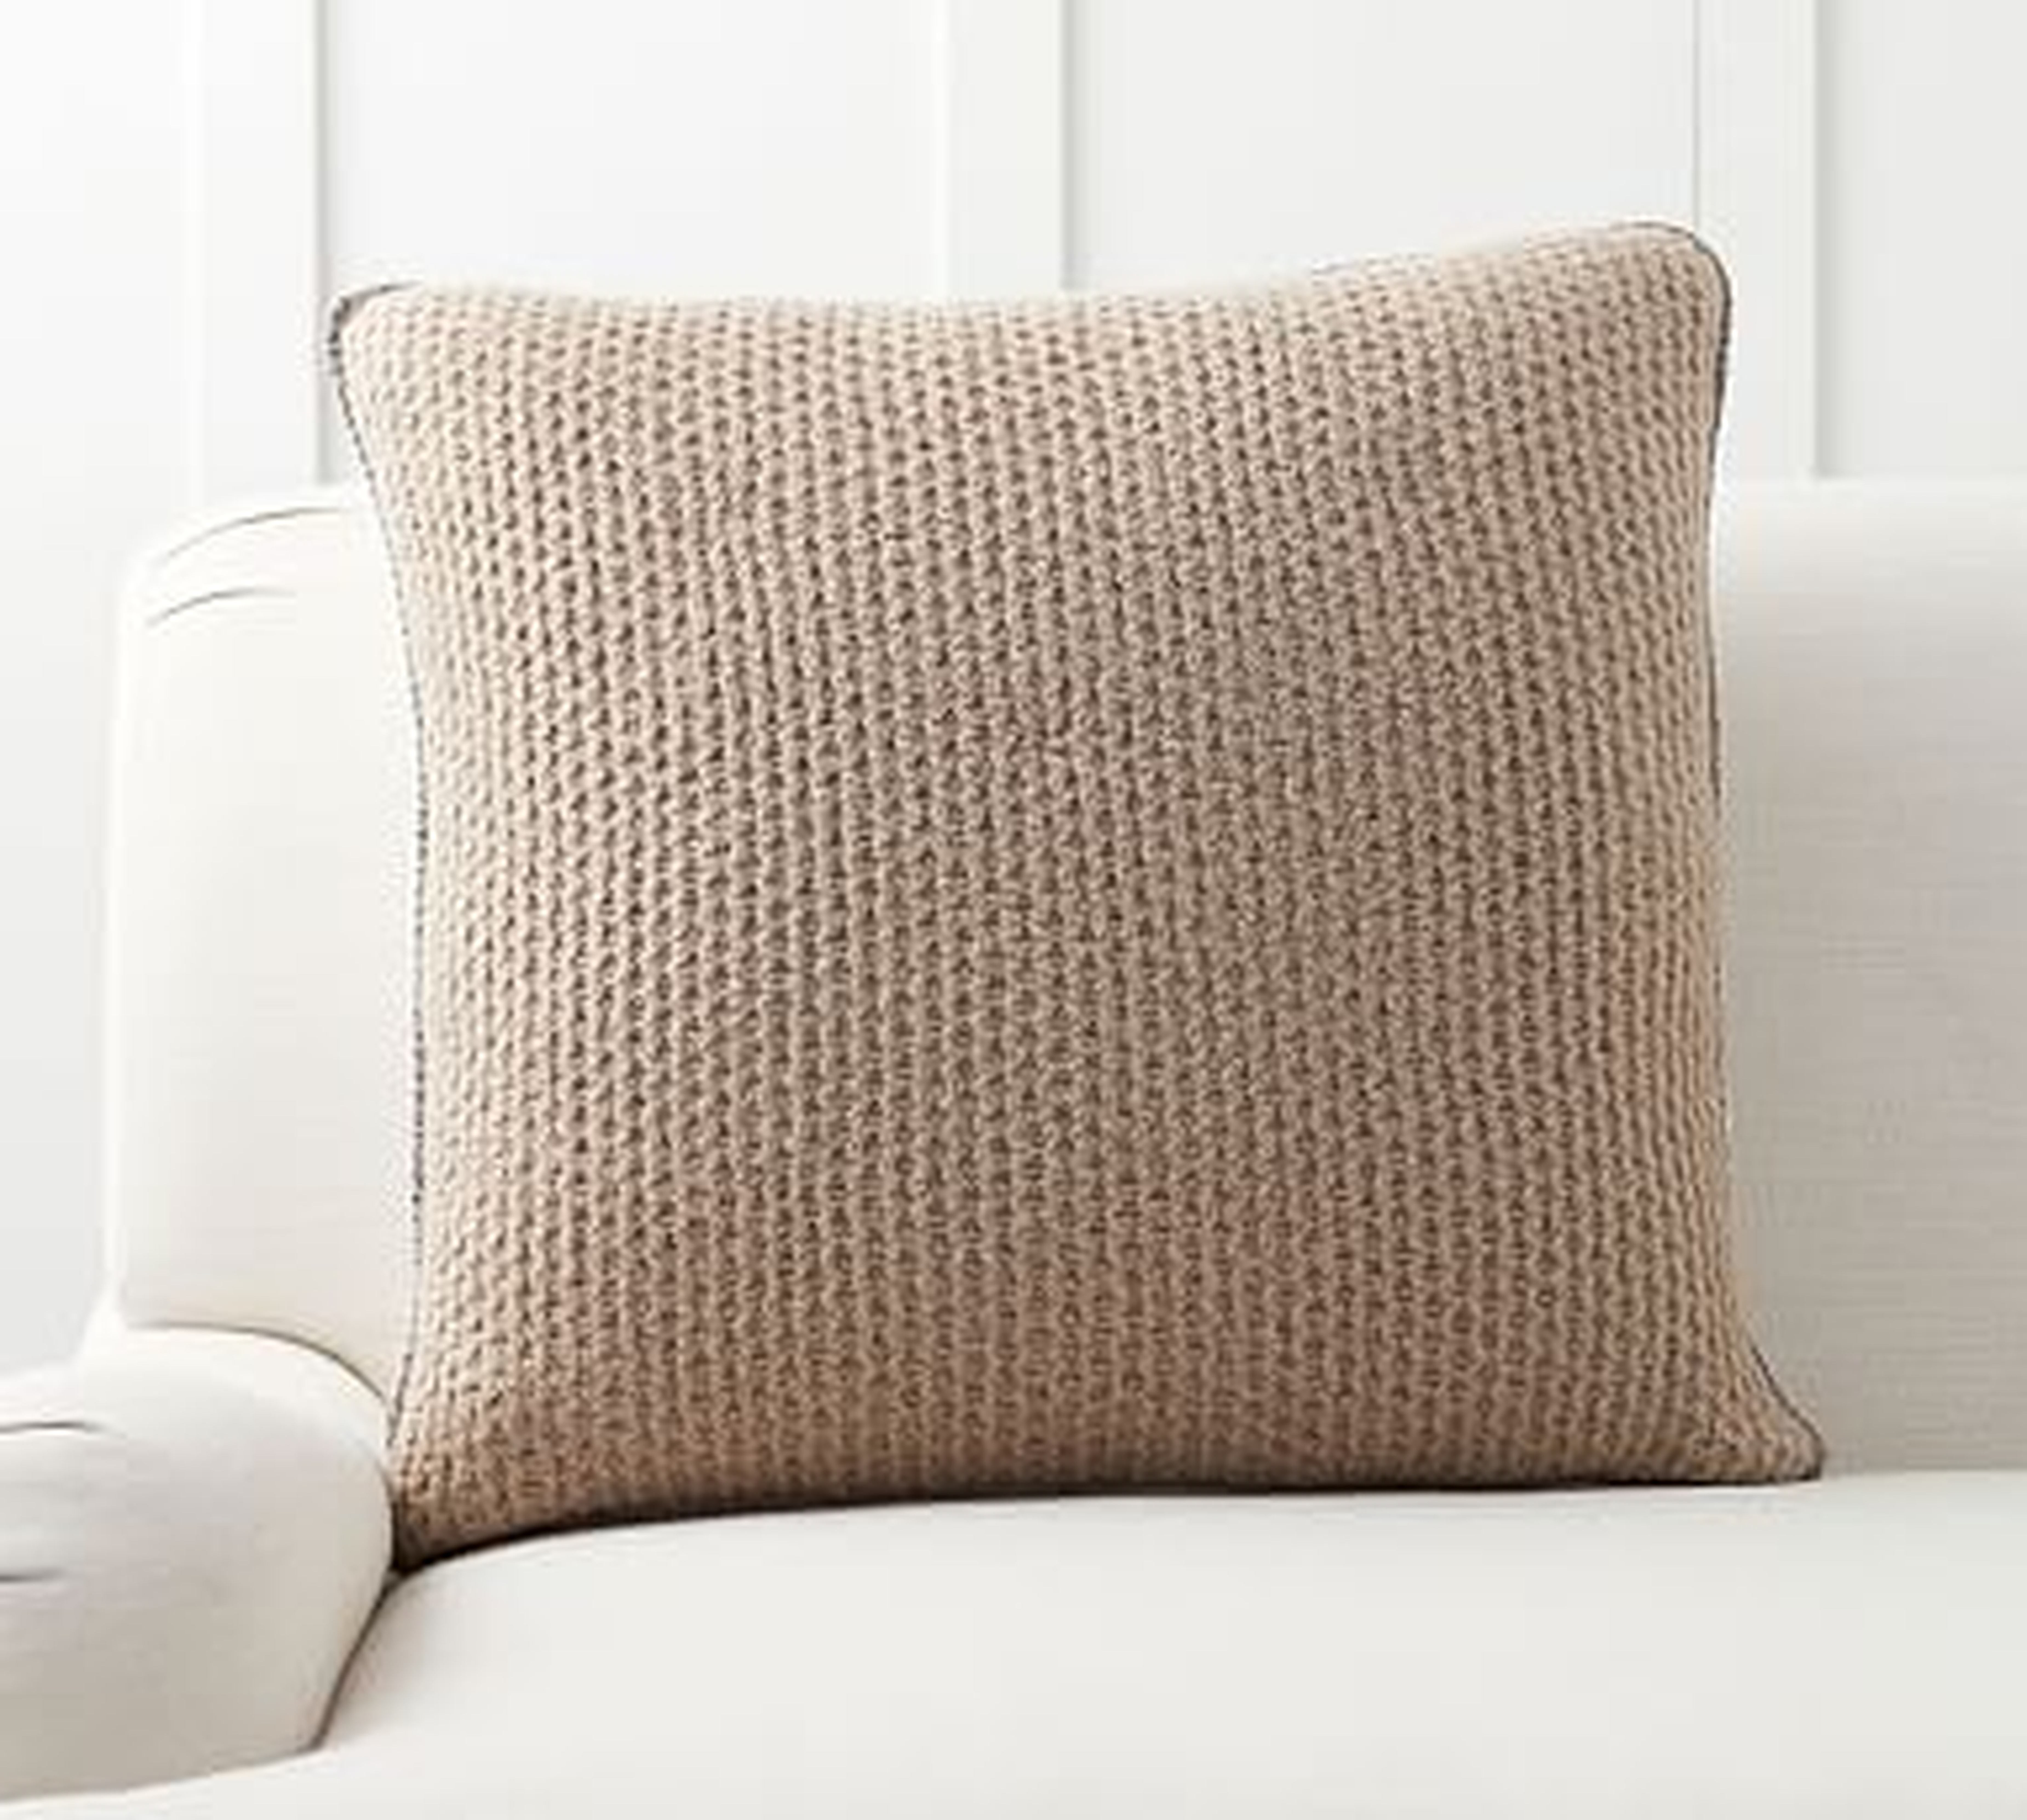 Thermal Knit Sherpa Back Pillow Cover, 24" x 24", Heathered Khaki - Pottery Barn